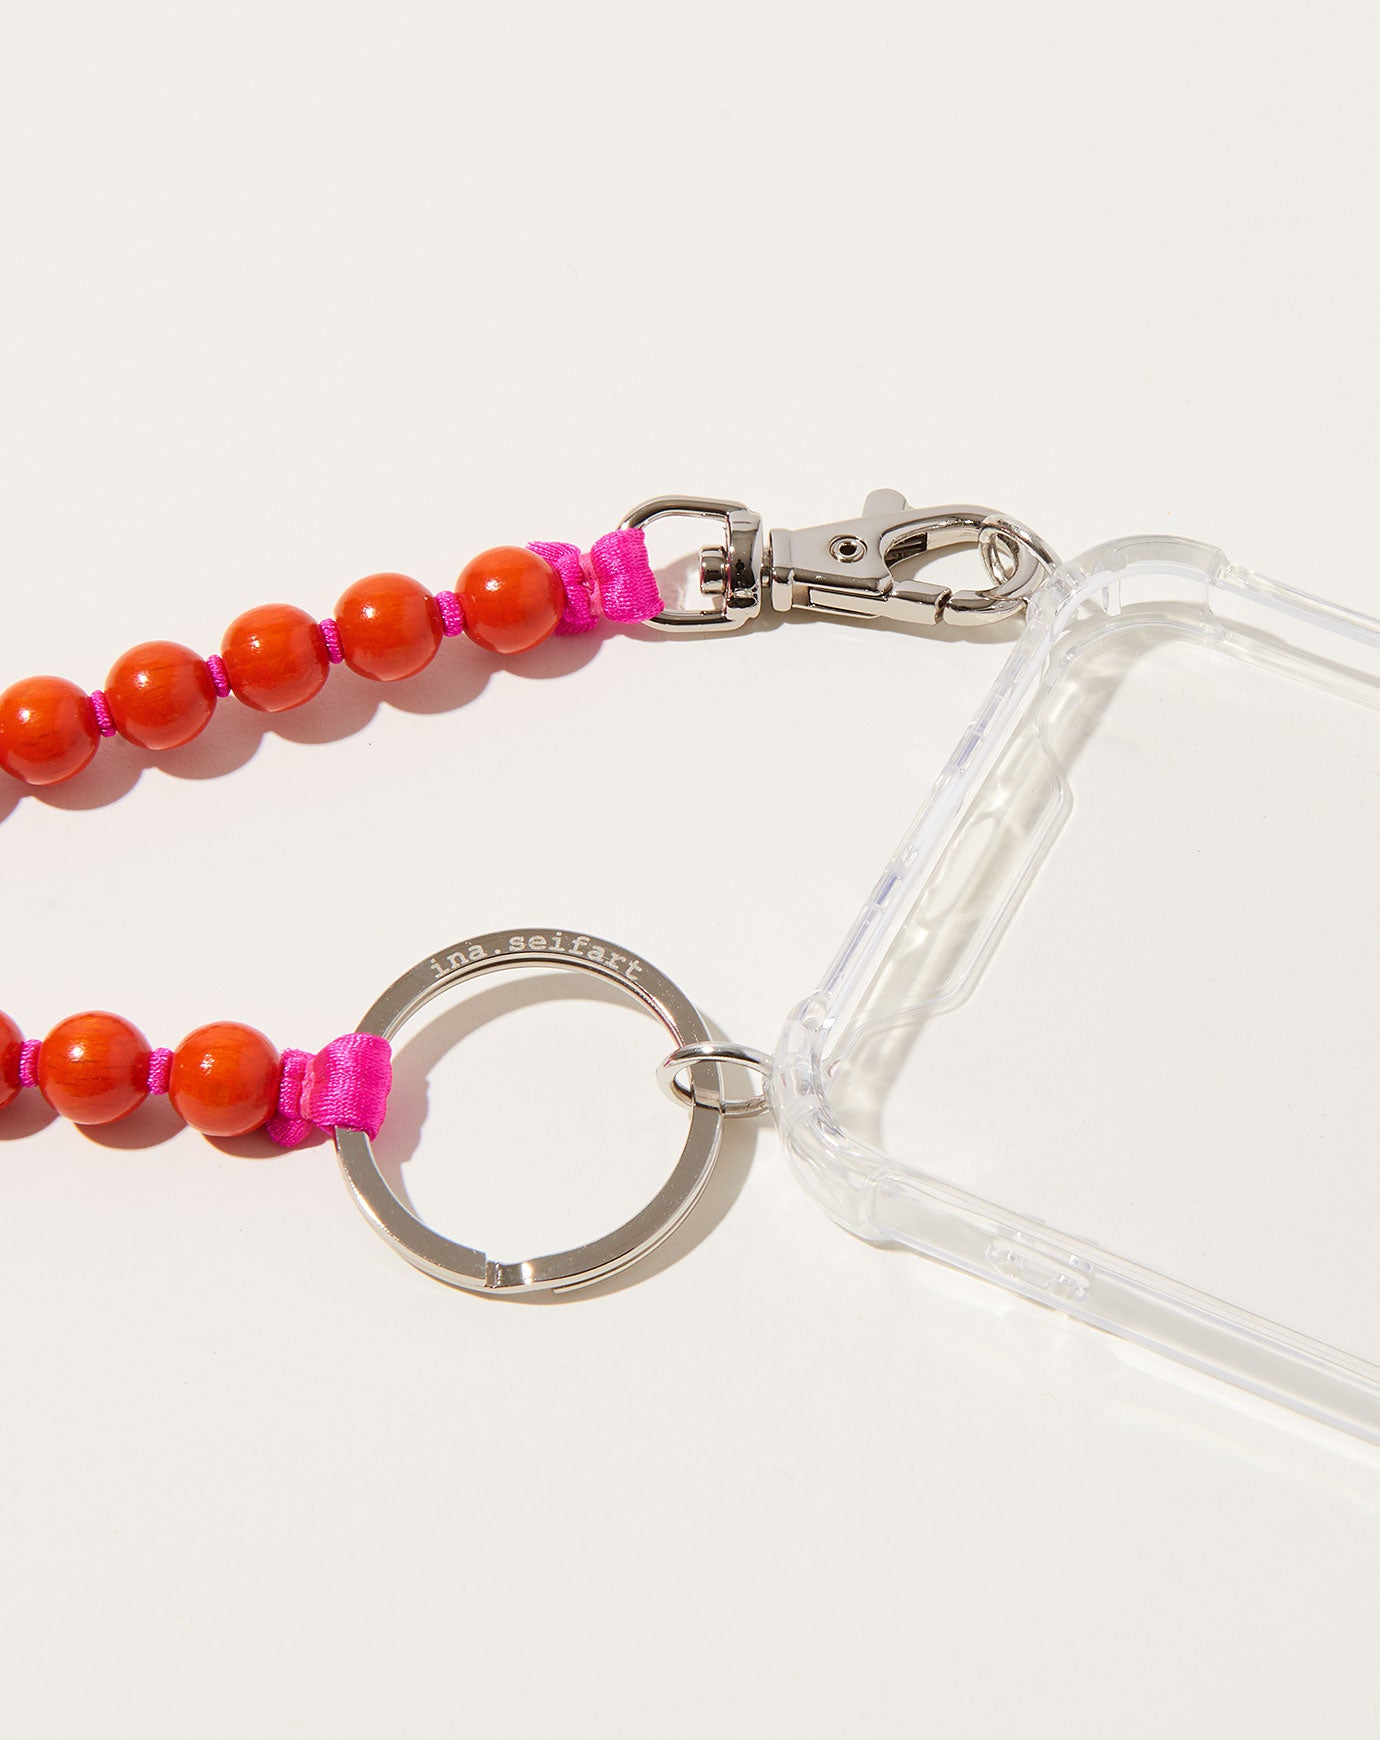 Ina Seifart Handykette iPhone Necklace in Orange on Pink